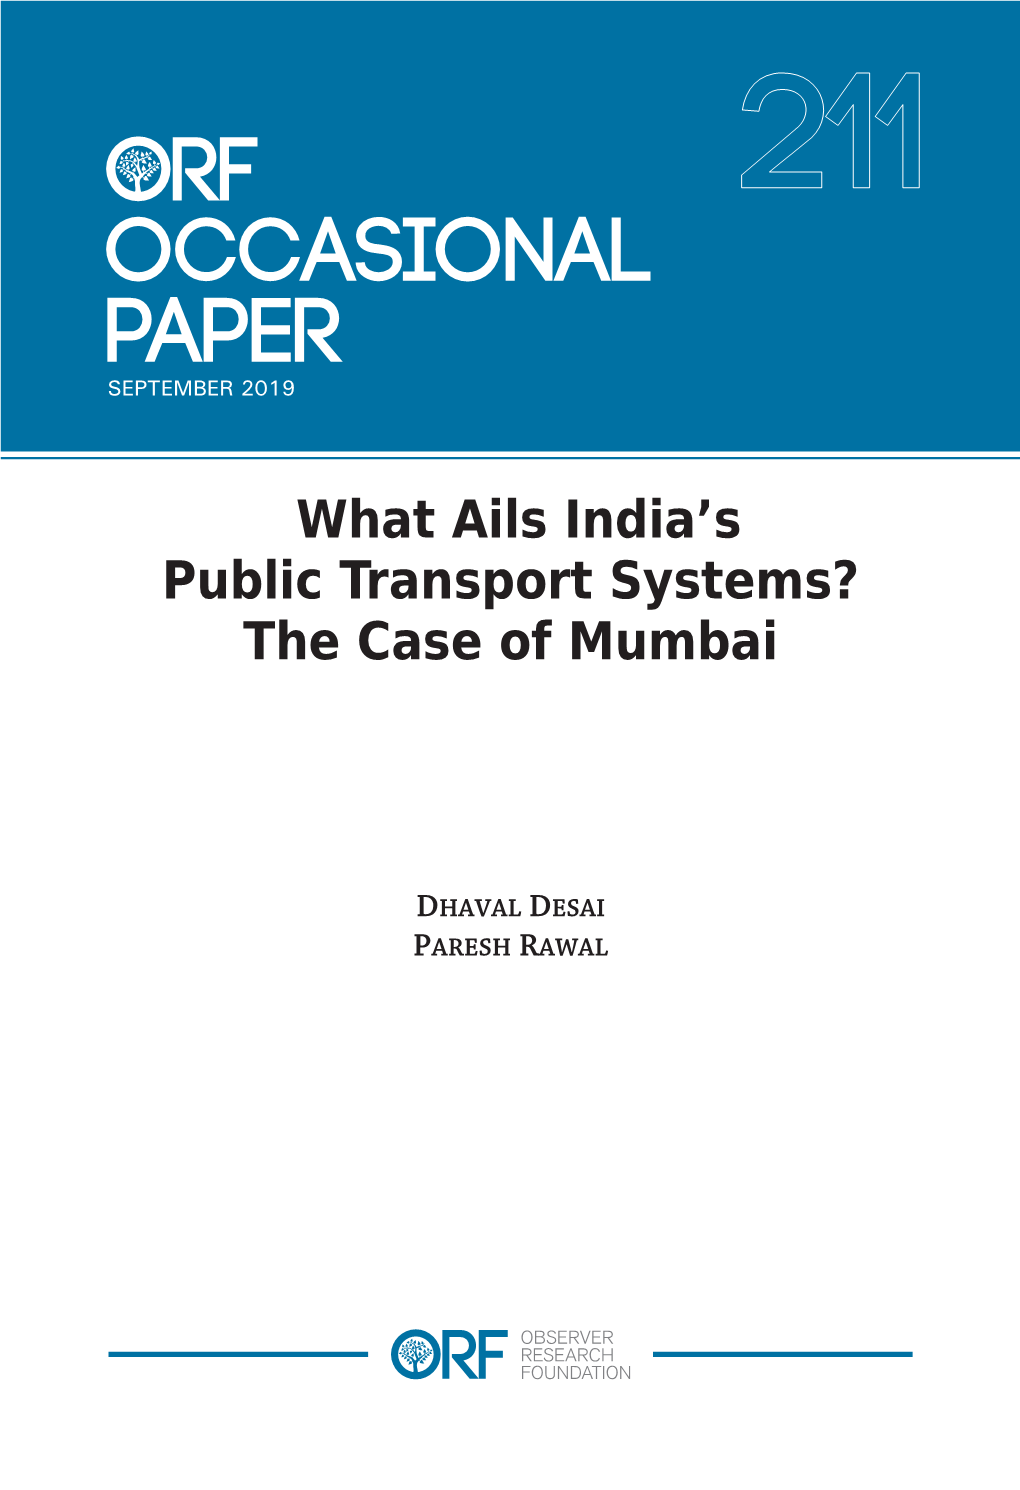 What Ails India's Public Transport Systems? the Case of Mumbai”, ORF Occasional Paper No